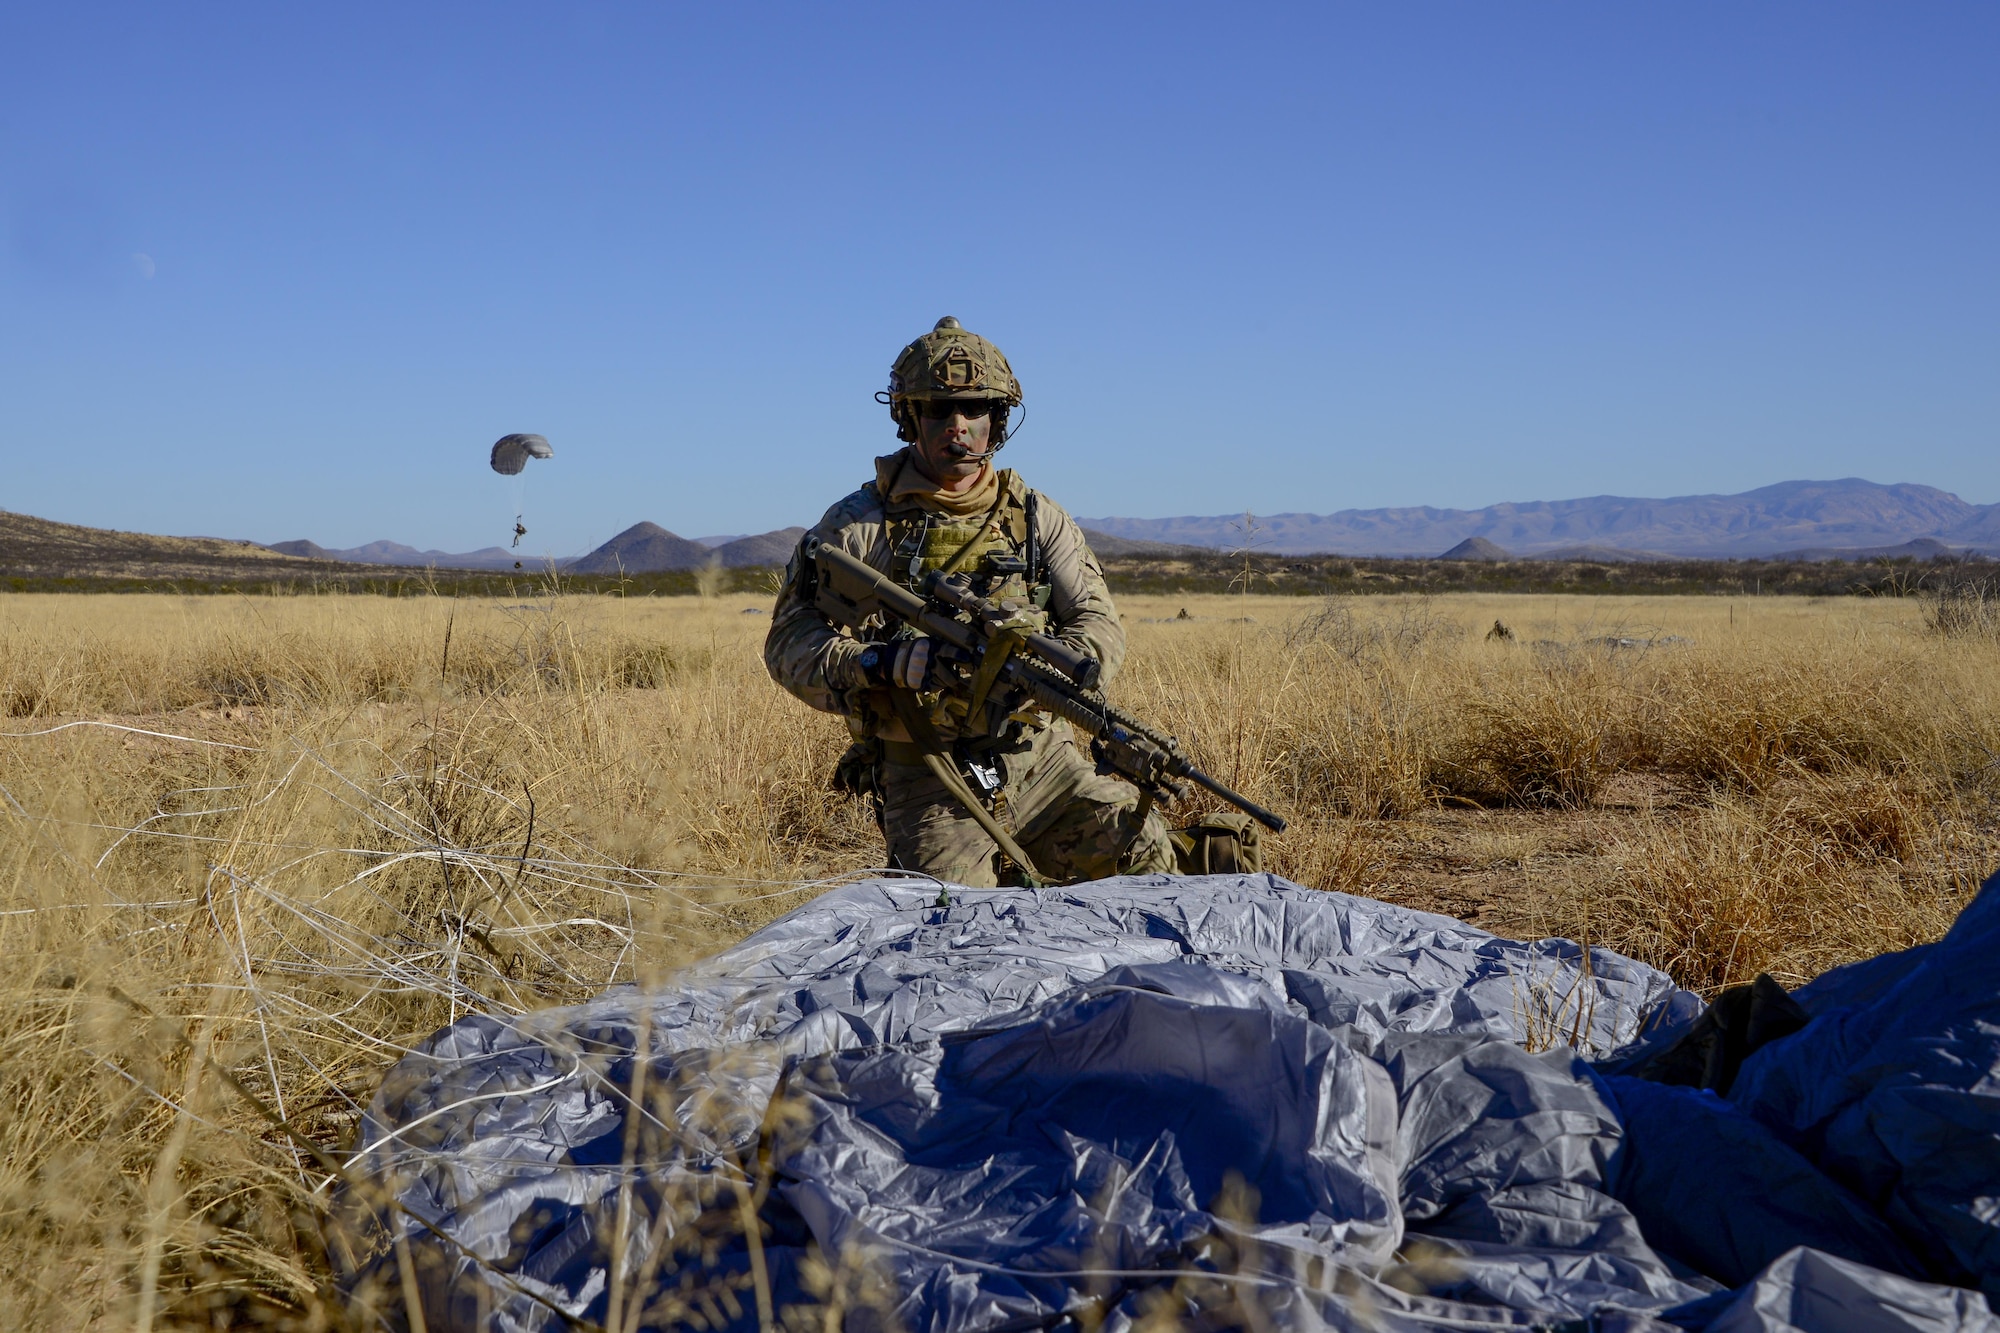 A U.S. Air Force pararescueman assigned to the 48th Rescue Squadron secures his landing site after parachuting from an HC-130J Combat King II at Fort Huachuca, Ariz., Dec. 8, 2016. Pararescuemen from the 48th RQS participated in a mass casualty exercise that involved a simulated plane crash resulting in 14 survivors in need of medical treatment. (U.S. Air Force photo by Senior Airman Betty R. Chevalier)